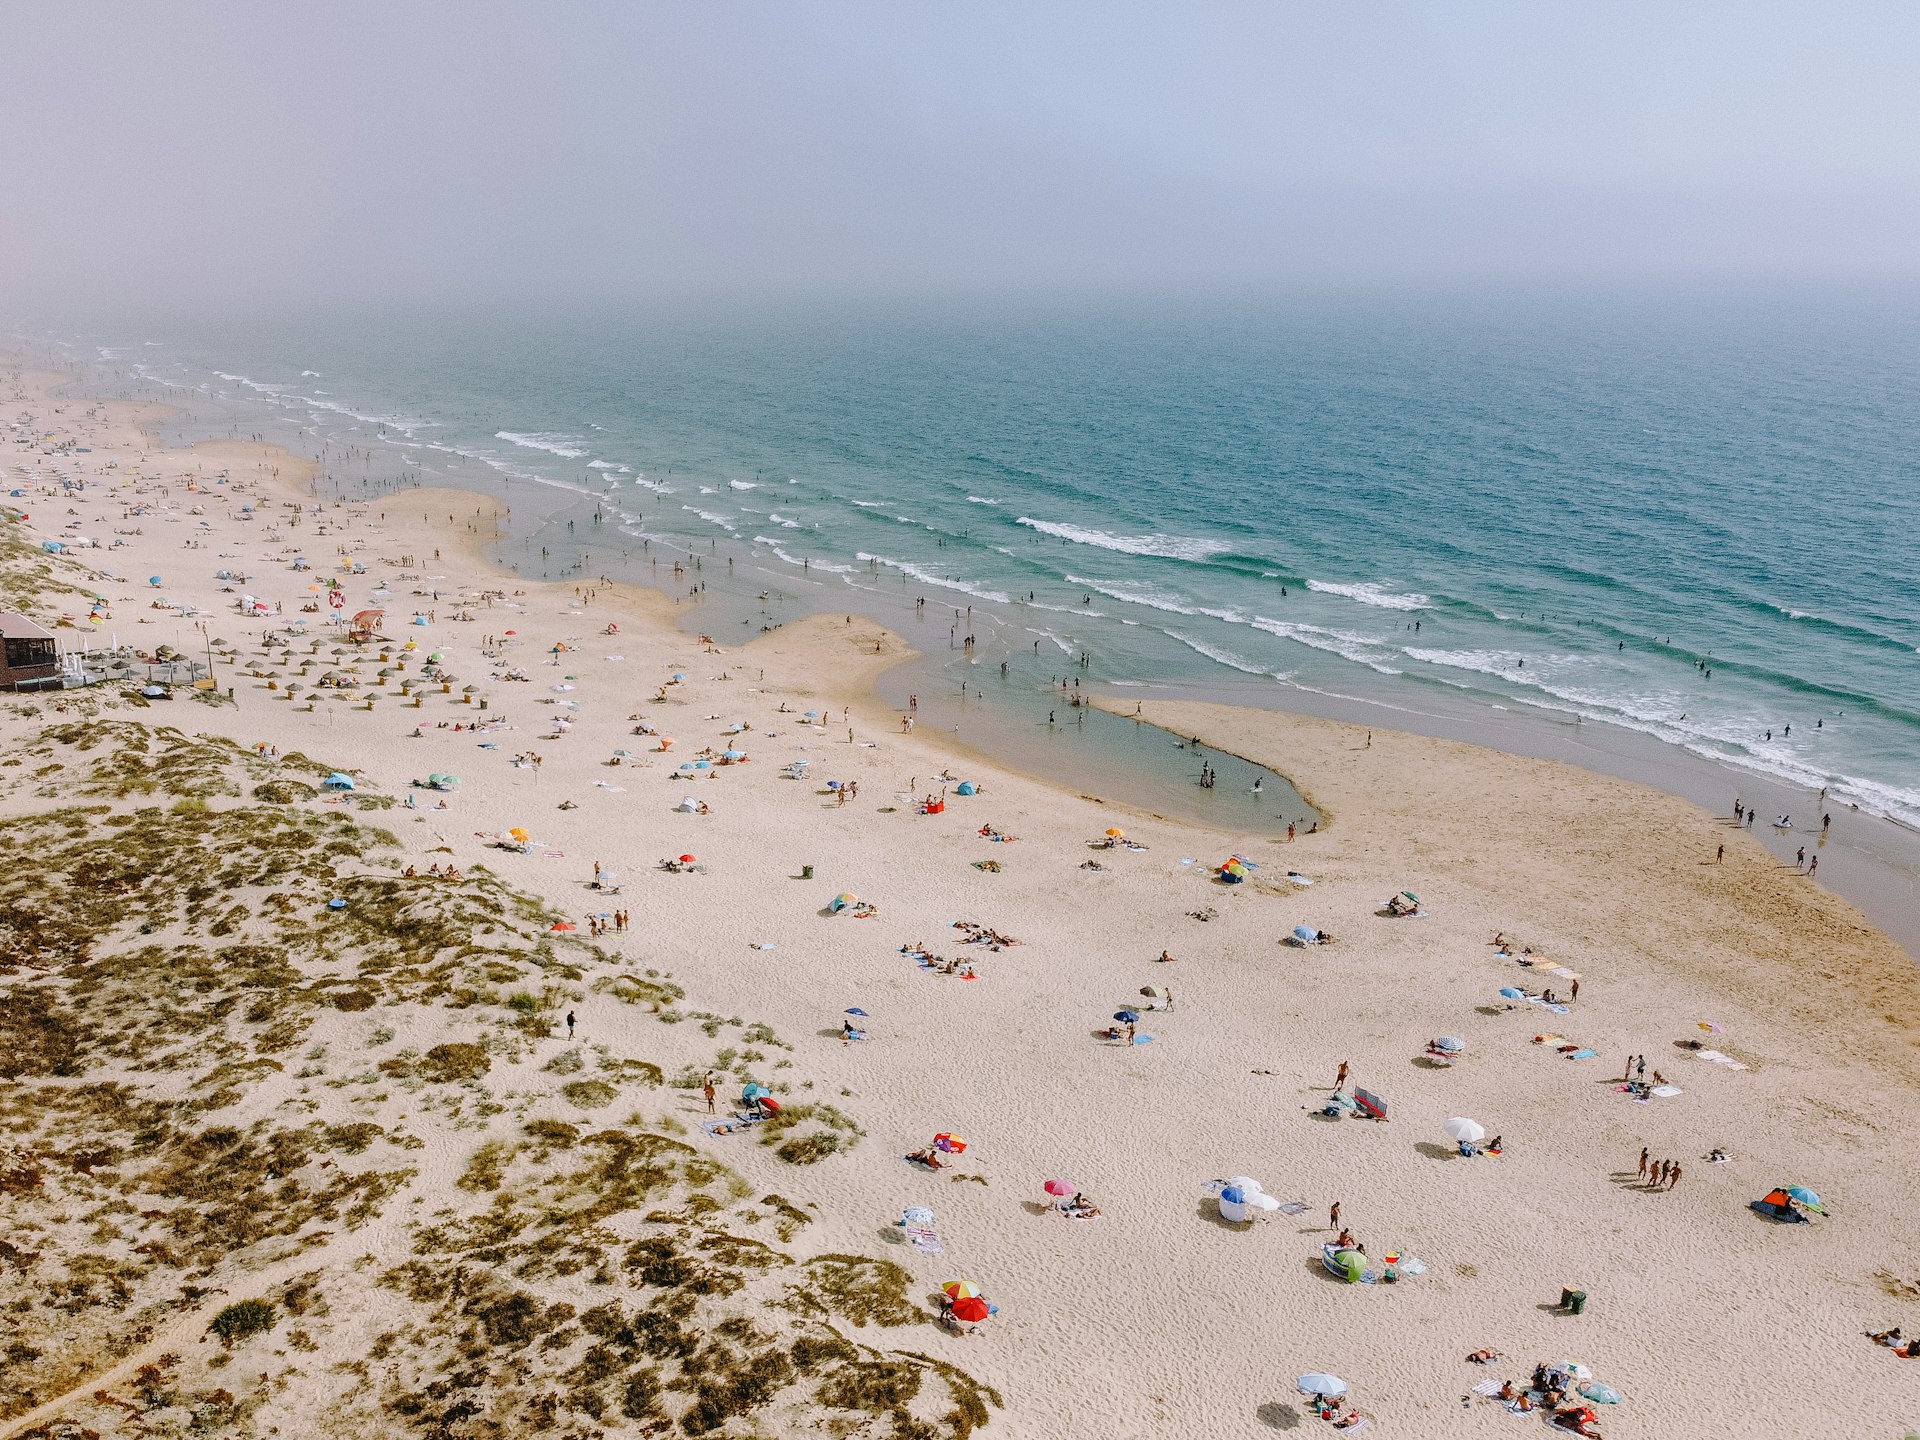 An aerial shot of a large sweep of sandy beach with many groups of people sat on the sand under colorful umbrellas